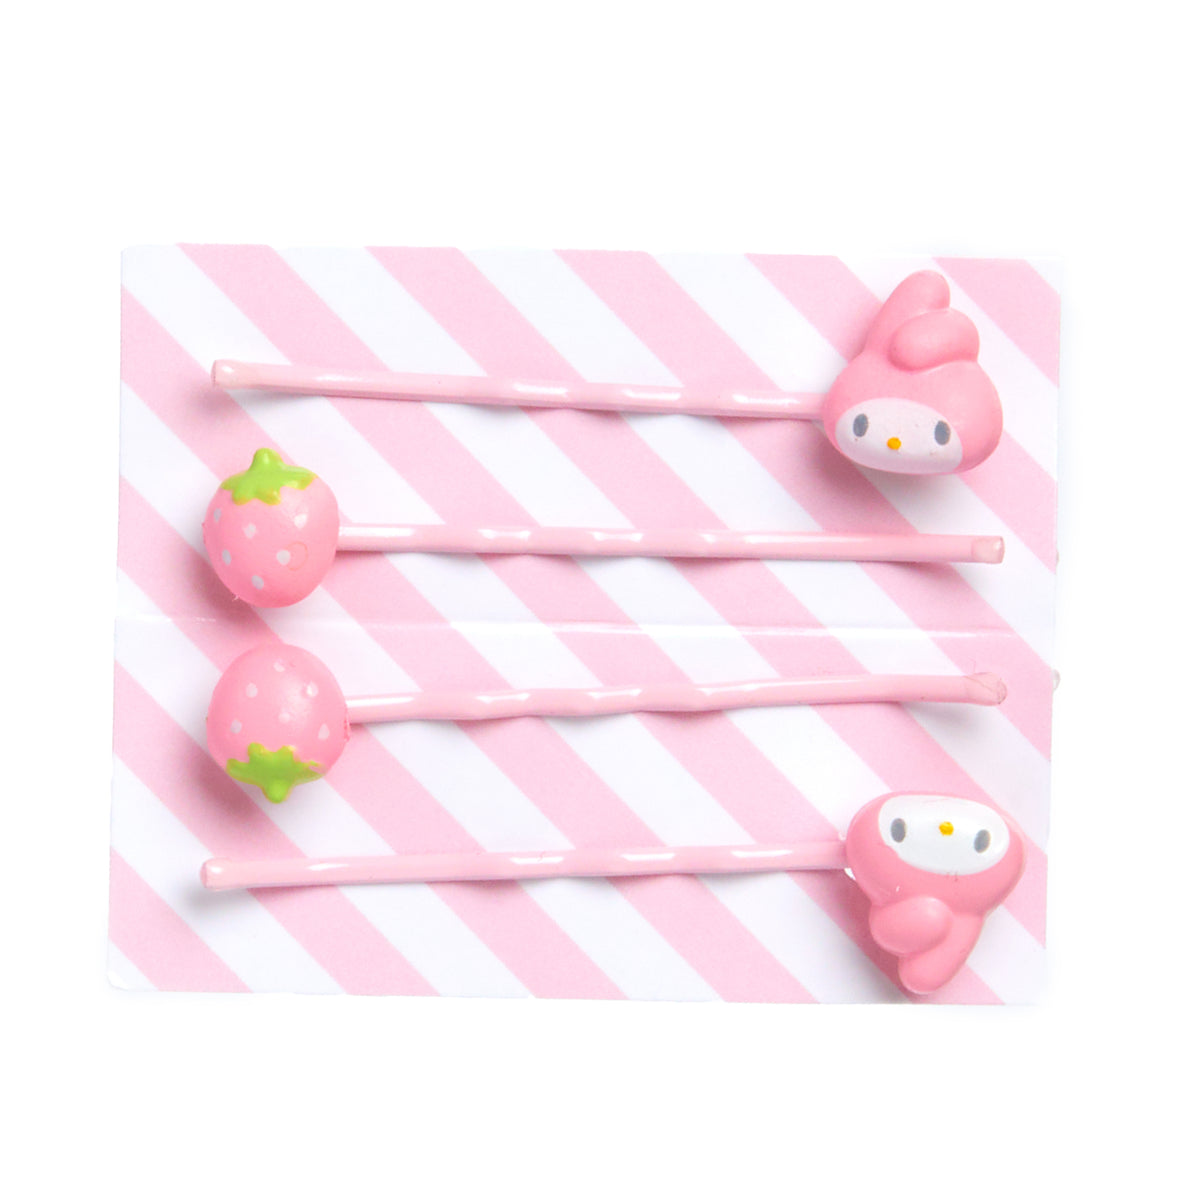 My Melody Hair Pins with a case